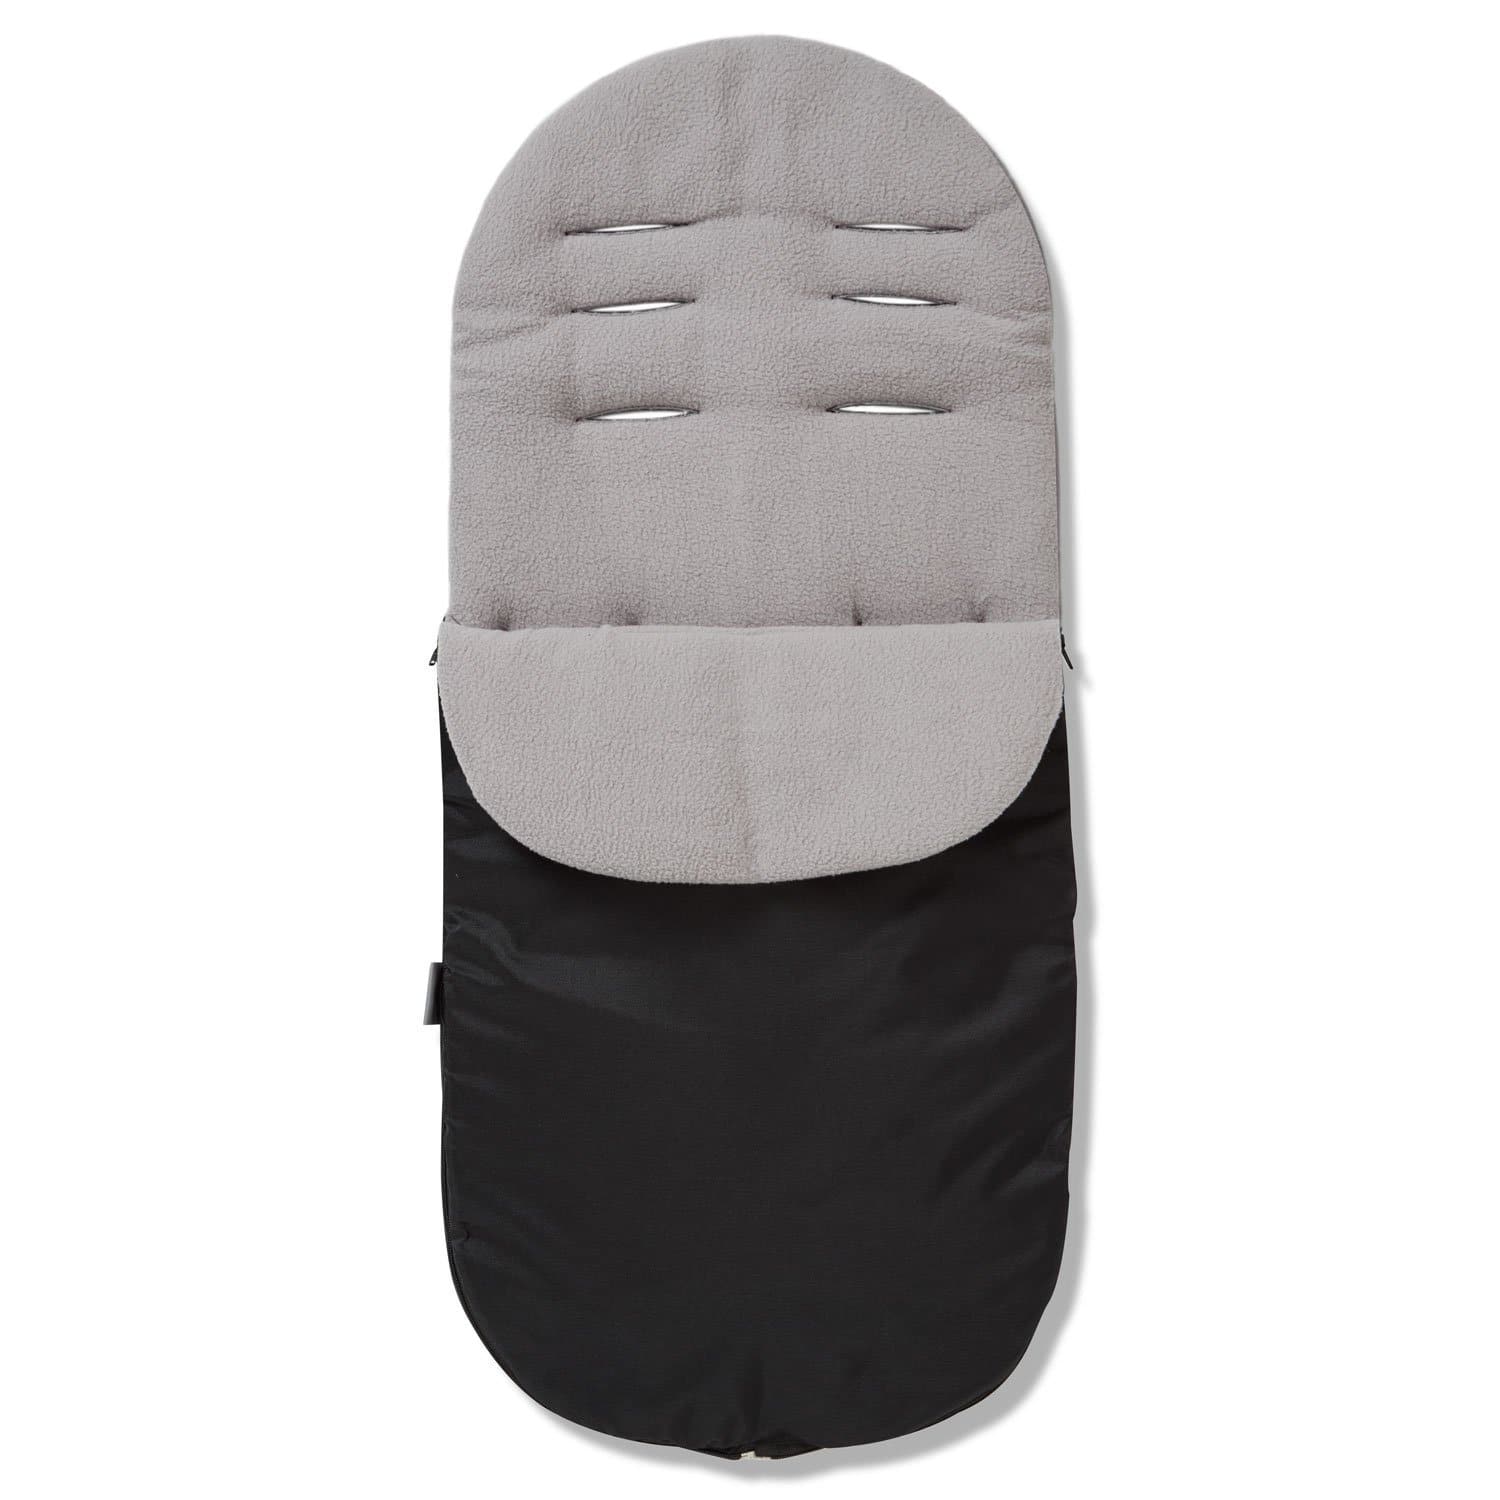 Footmuff / Cosy Toes Compatible with Casual - For Your Little One